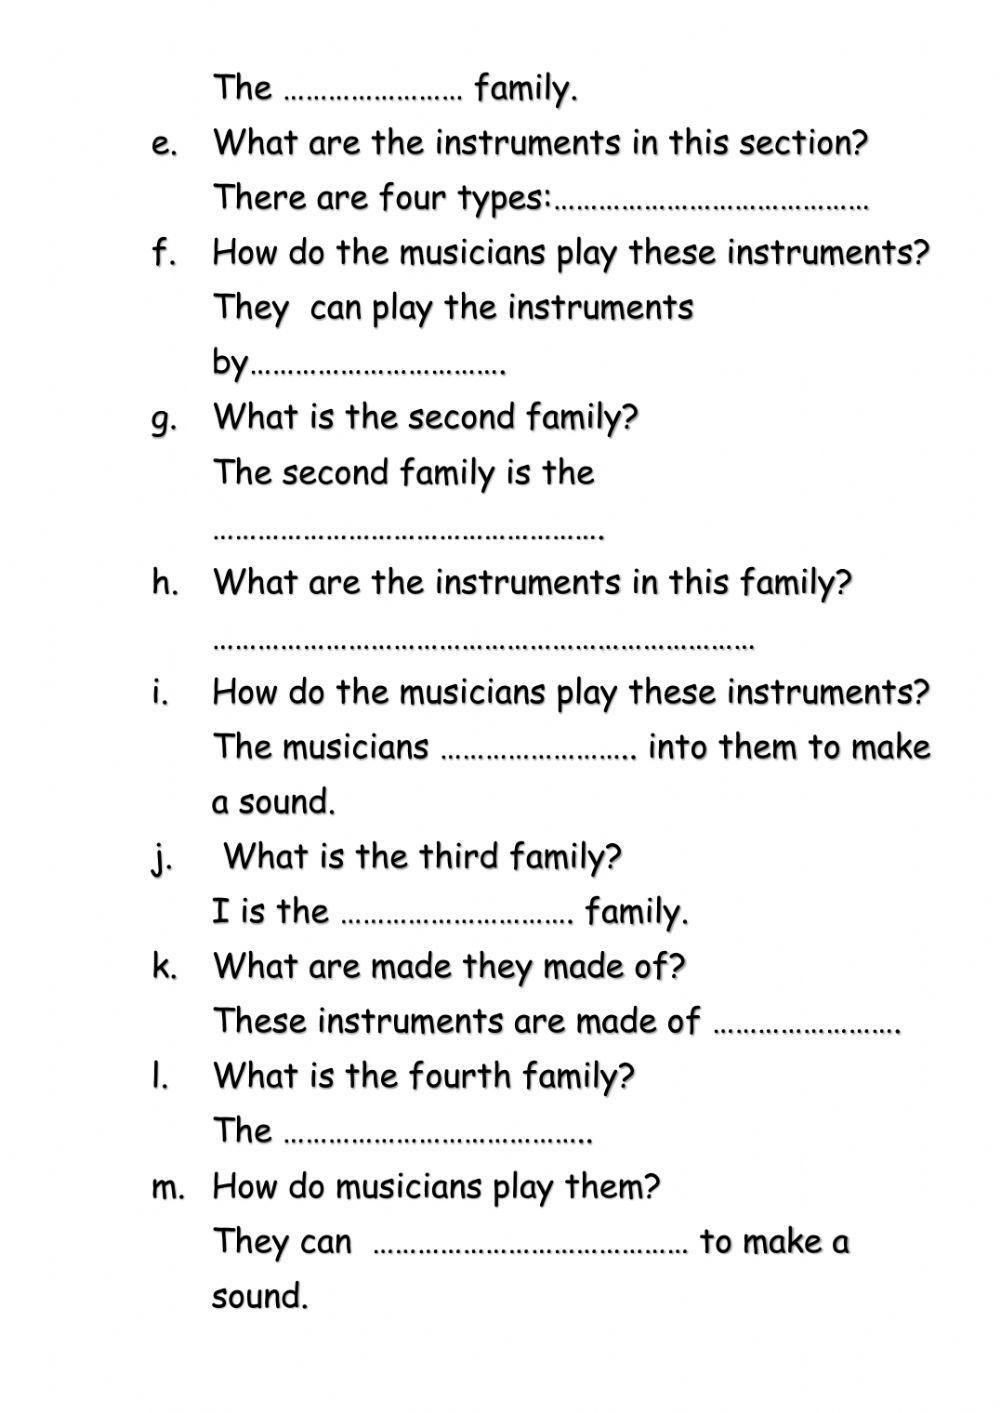 Orchestral families